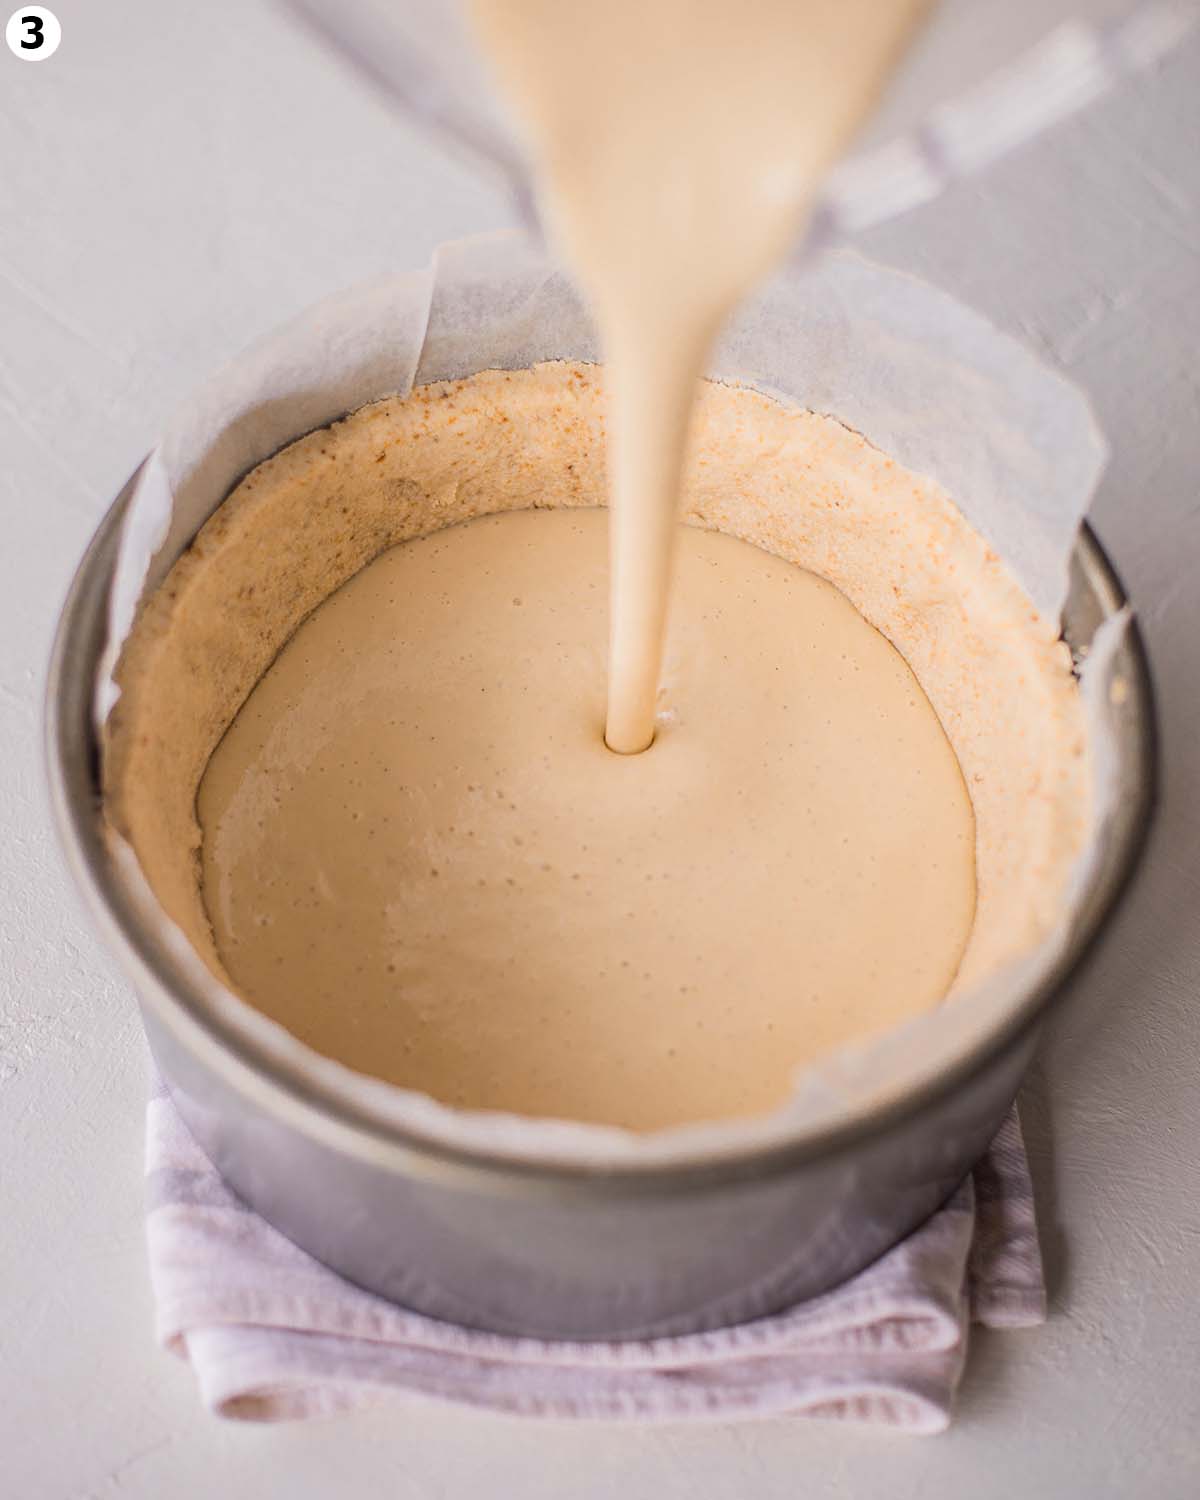 Blender pouring smooth cheesecake mixture into par-baked crust.